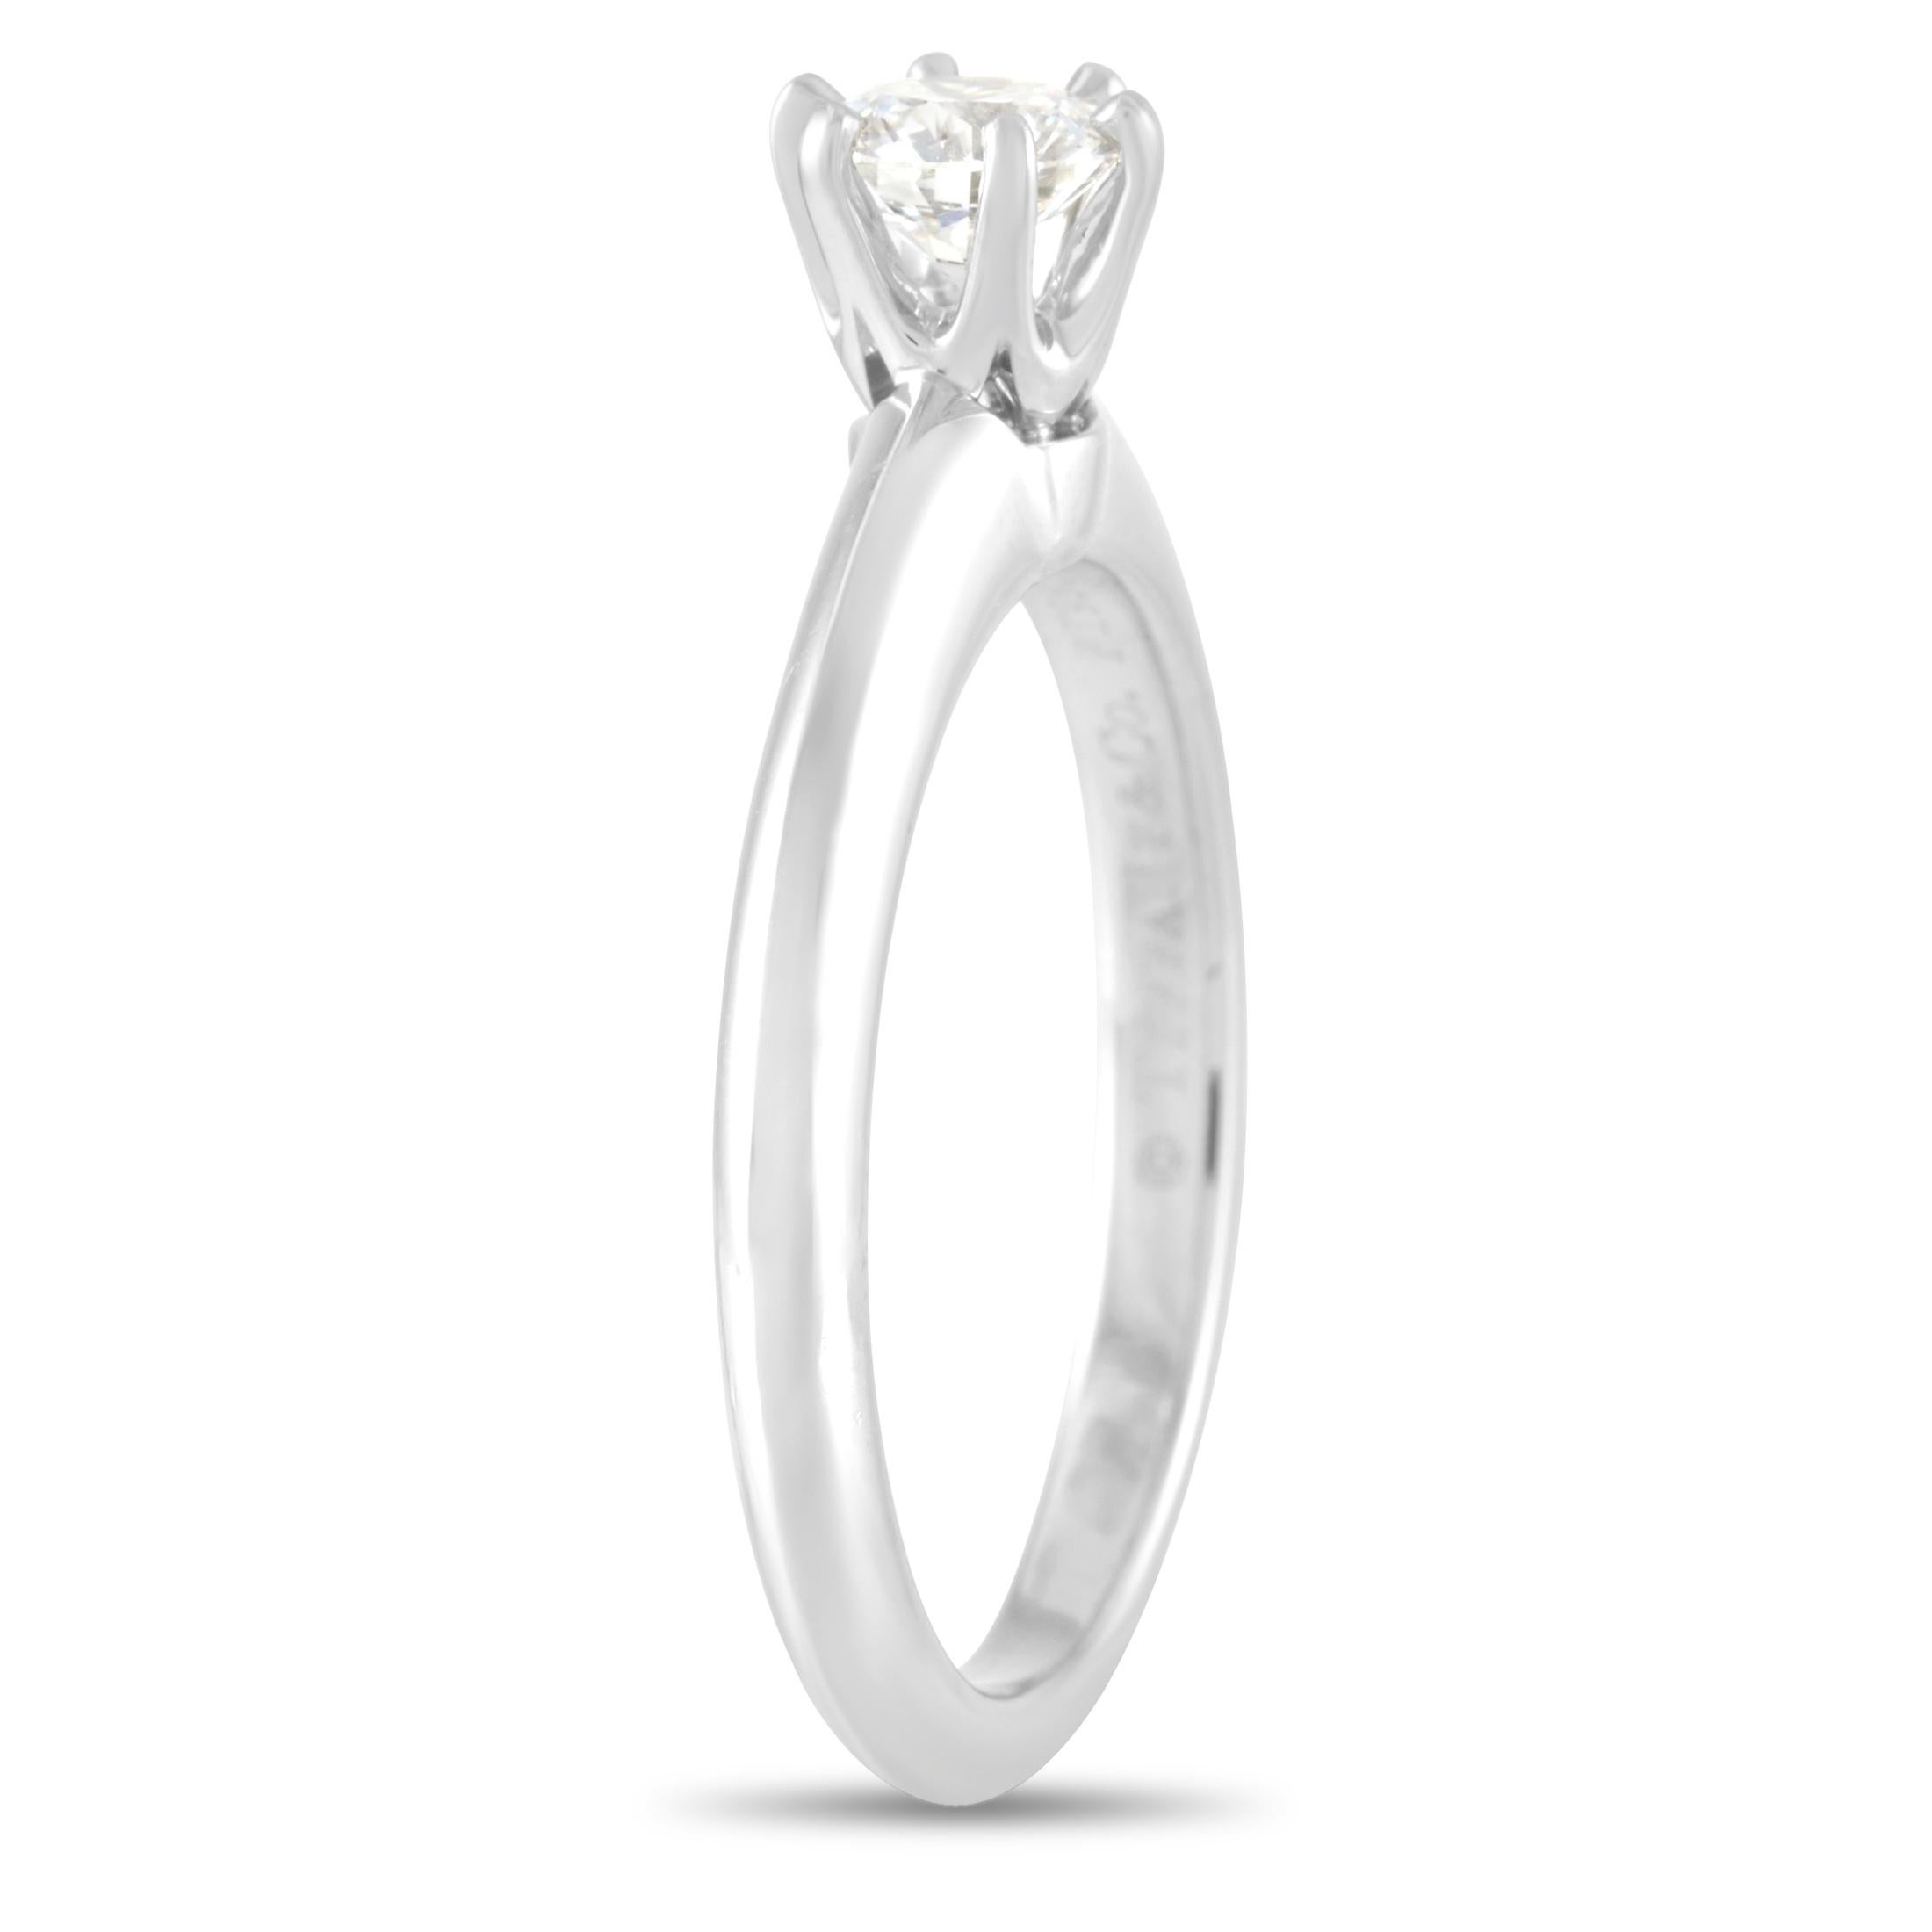 Created with timeless beauty and impressive craftsmanship, this Tiffany & Co. Platinum 0.31 ct Diamond Solitaire Ring will get your beloved staring at it for hours on end. It showcases a classic design that's 100% Tiffany. It features a platinum